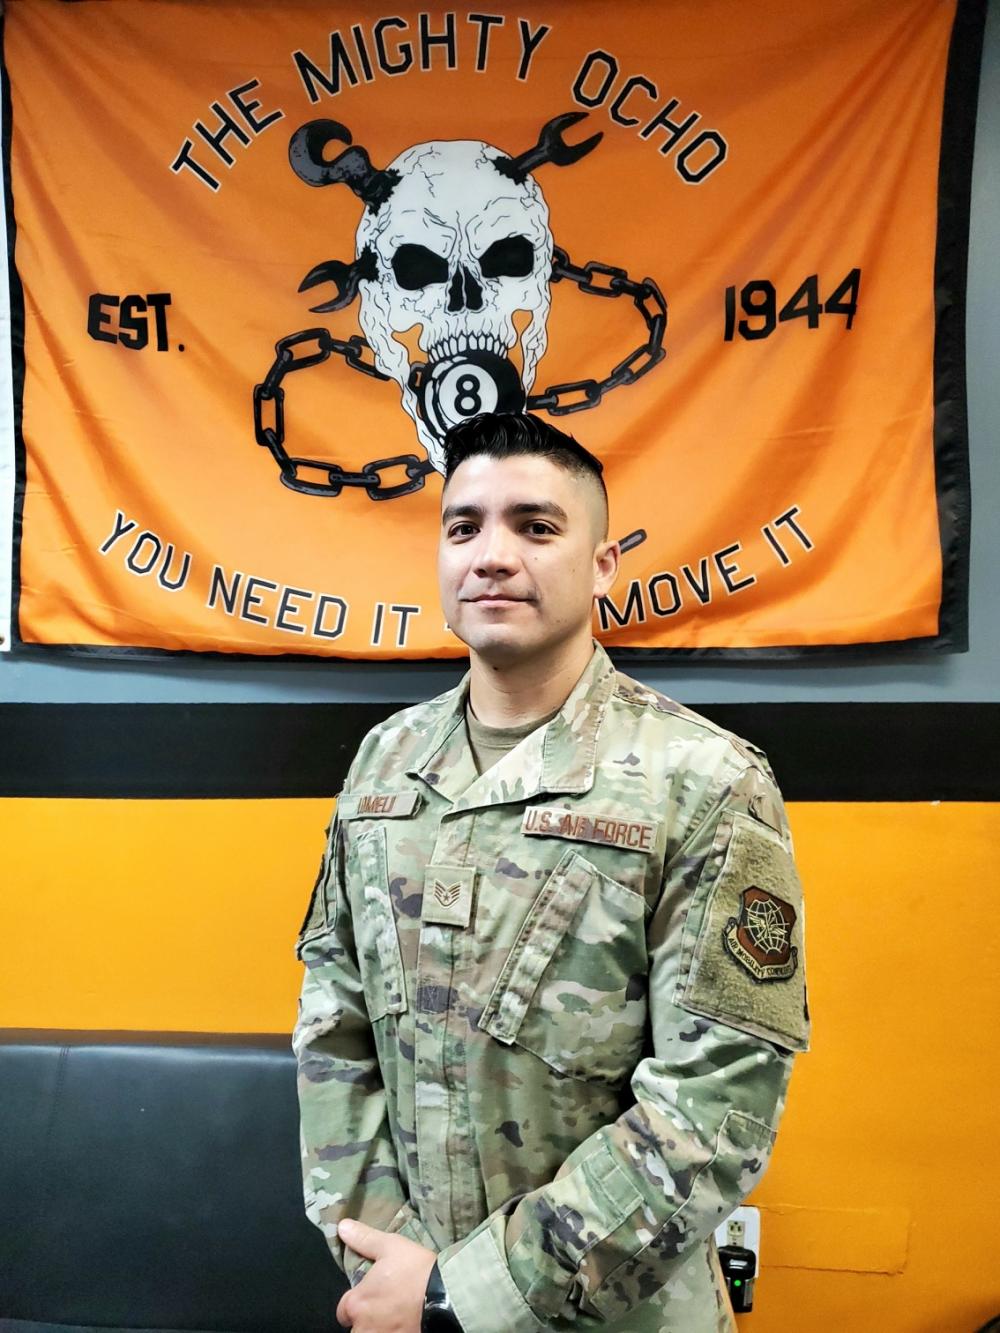 Resisting the comfort zone: 8th EAMS maintainer shares story of resilience